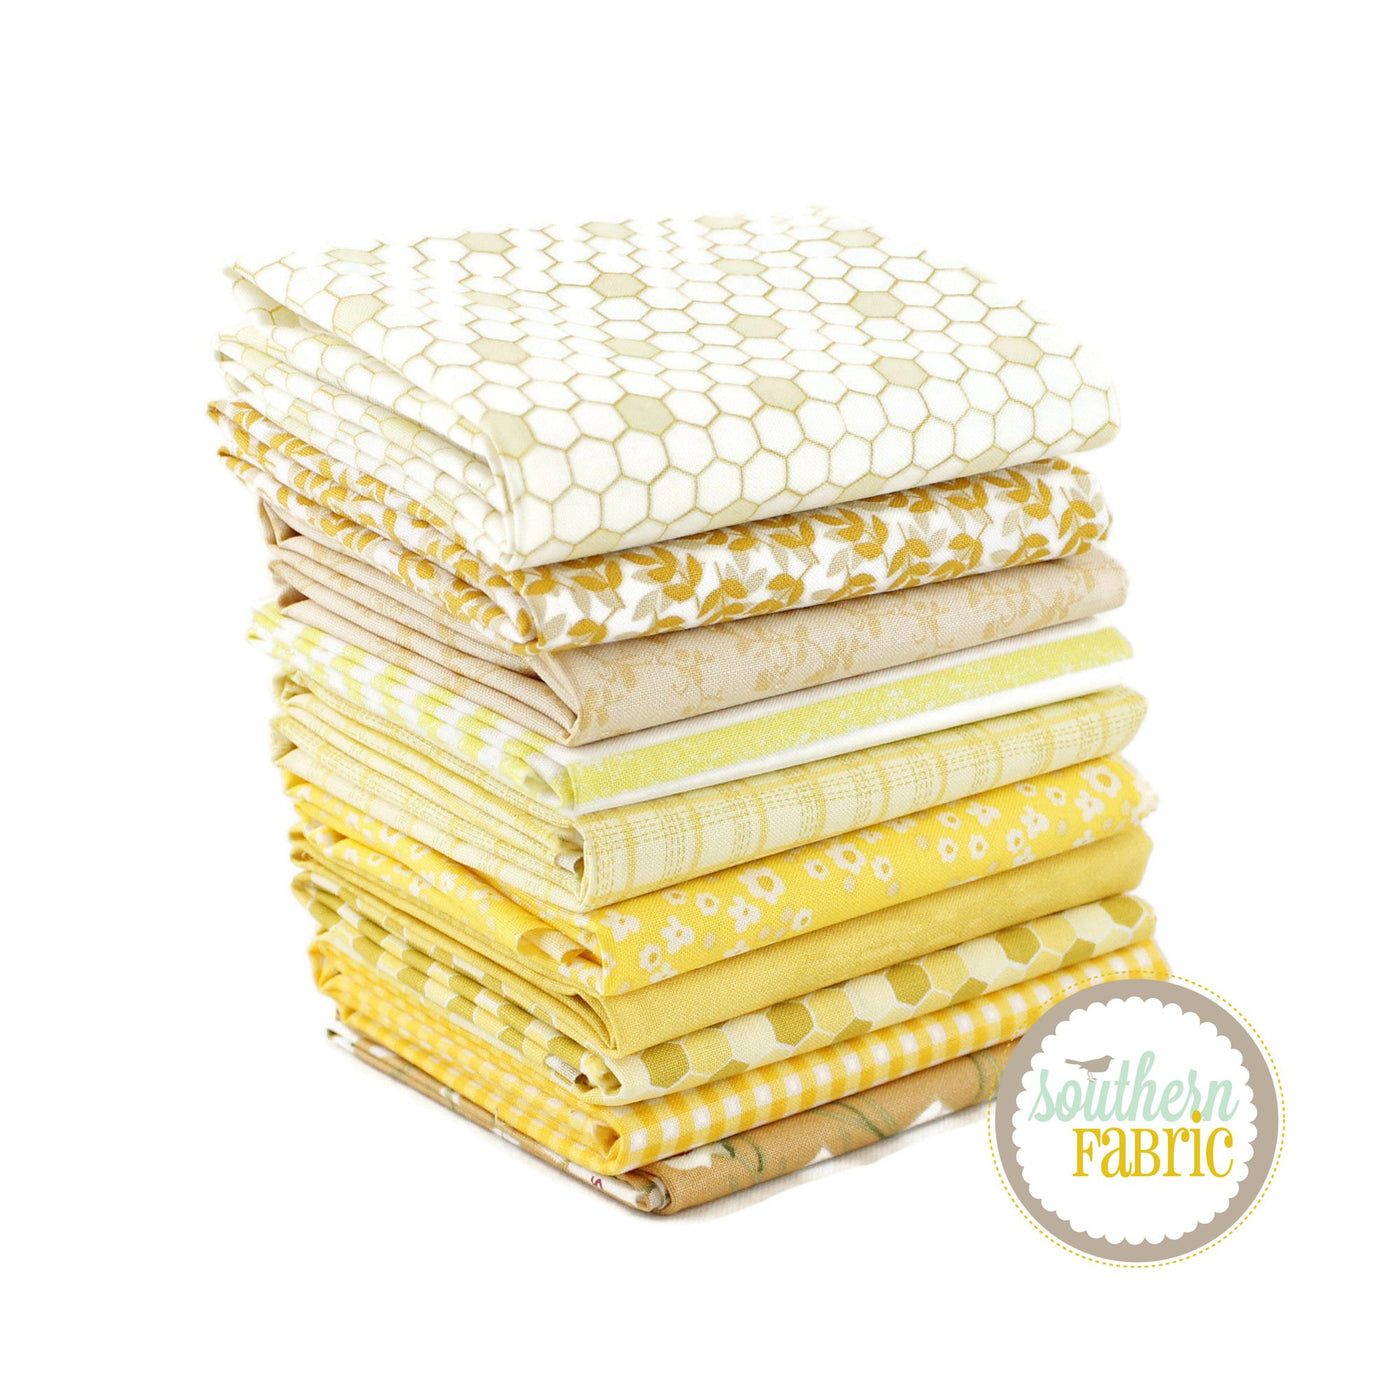 Yellow Fat Quarter Bundle (10 pcs) by Mixed Designers for Southern Fabric